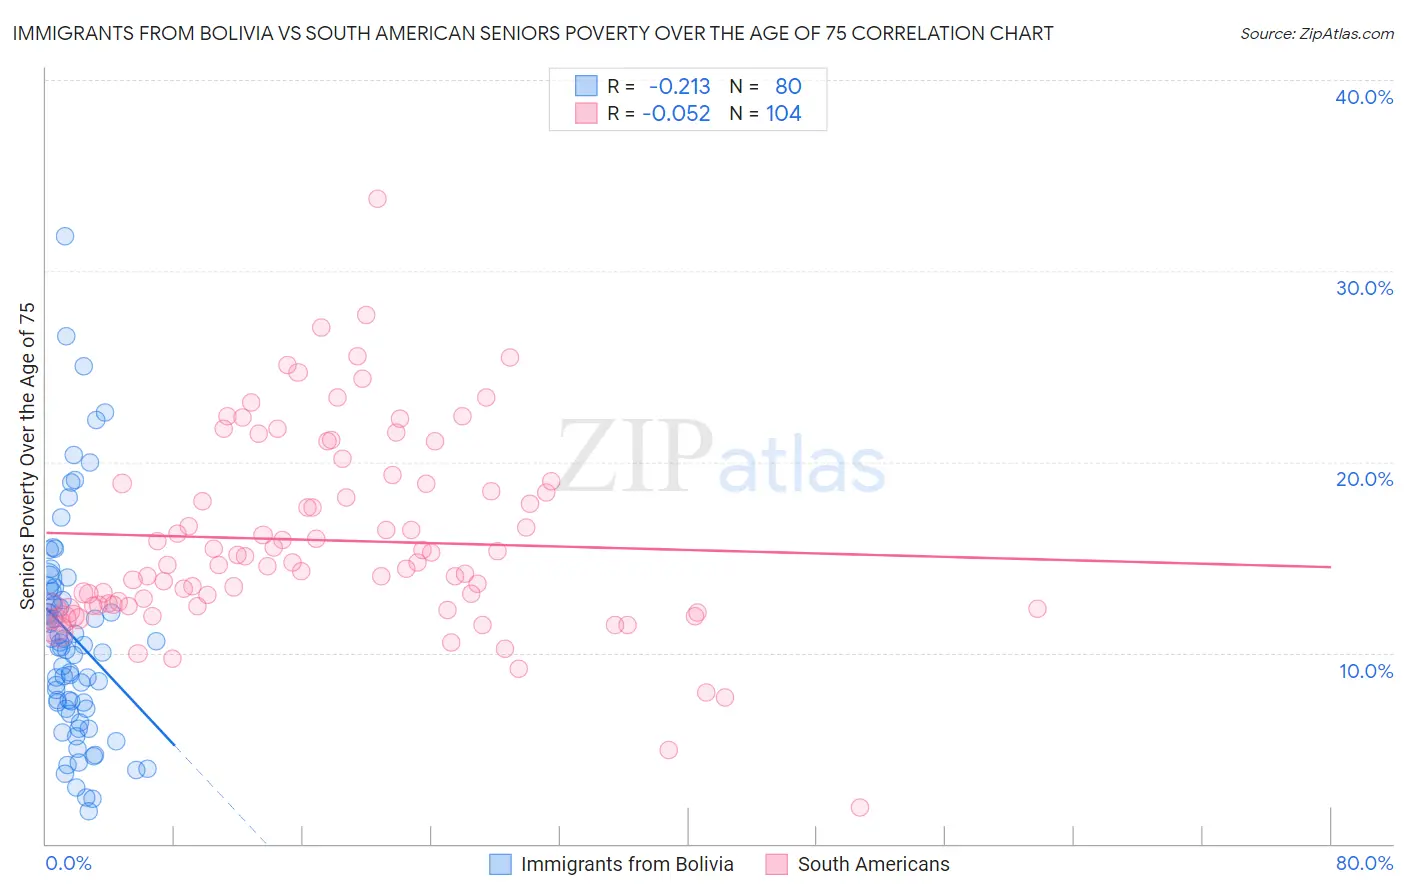 Immigrants from Bolivia vs South American Seniors Poverty Over the Age of 75